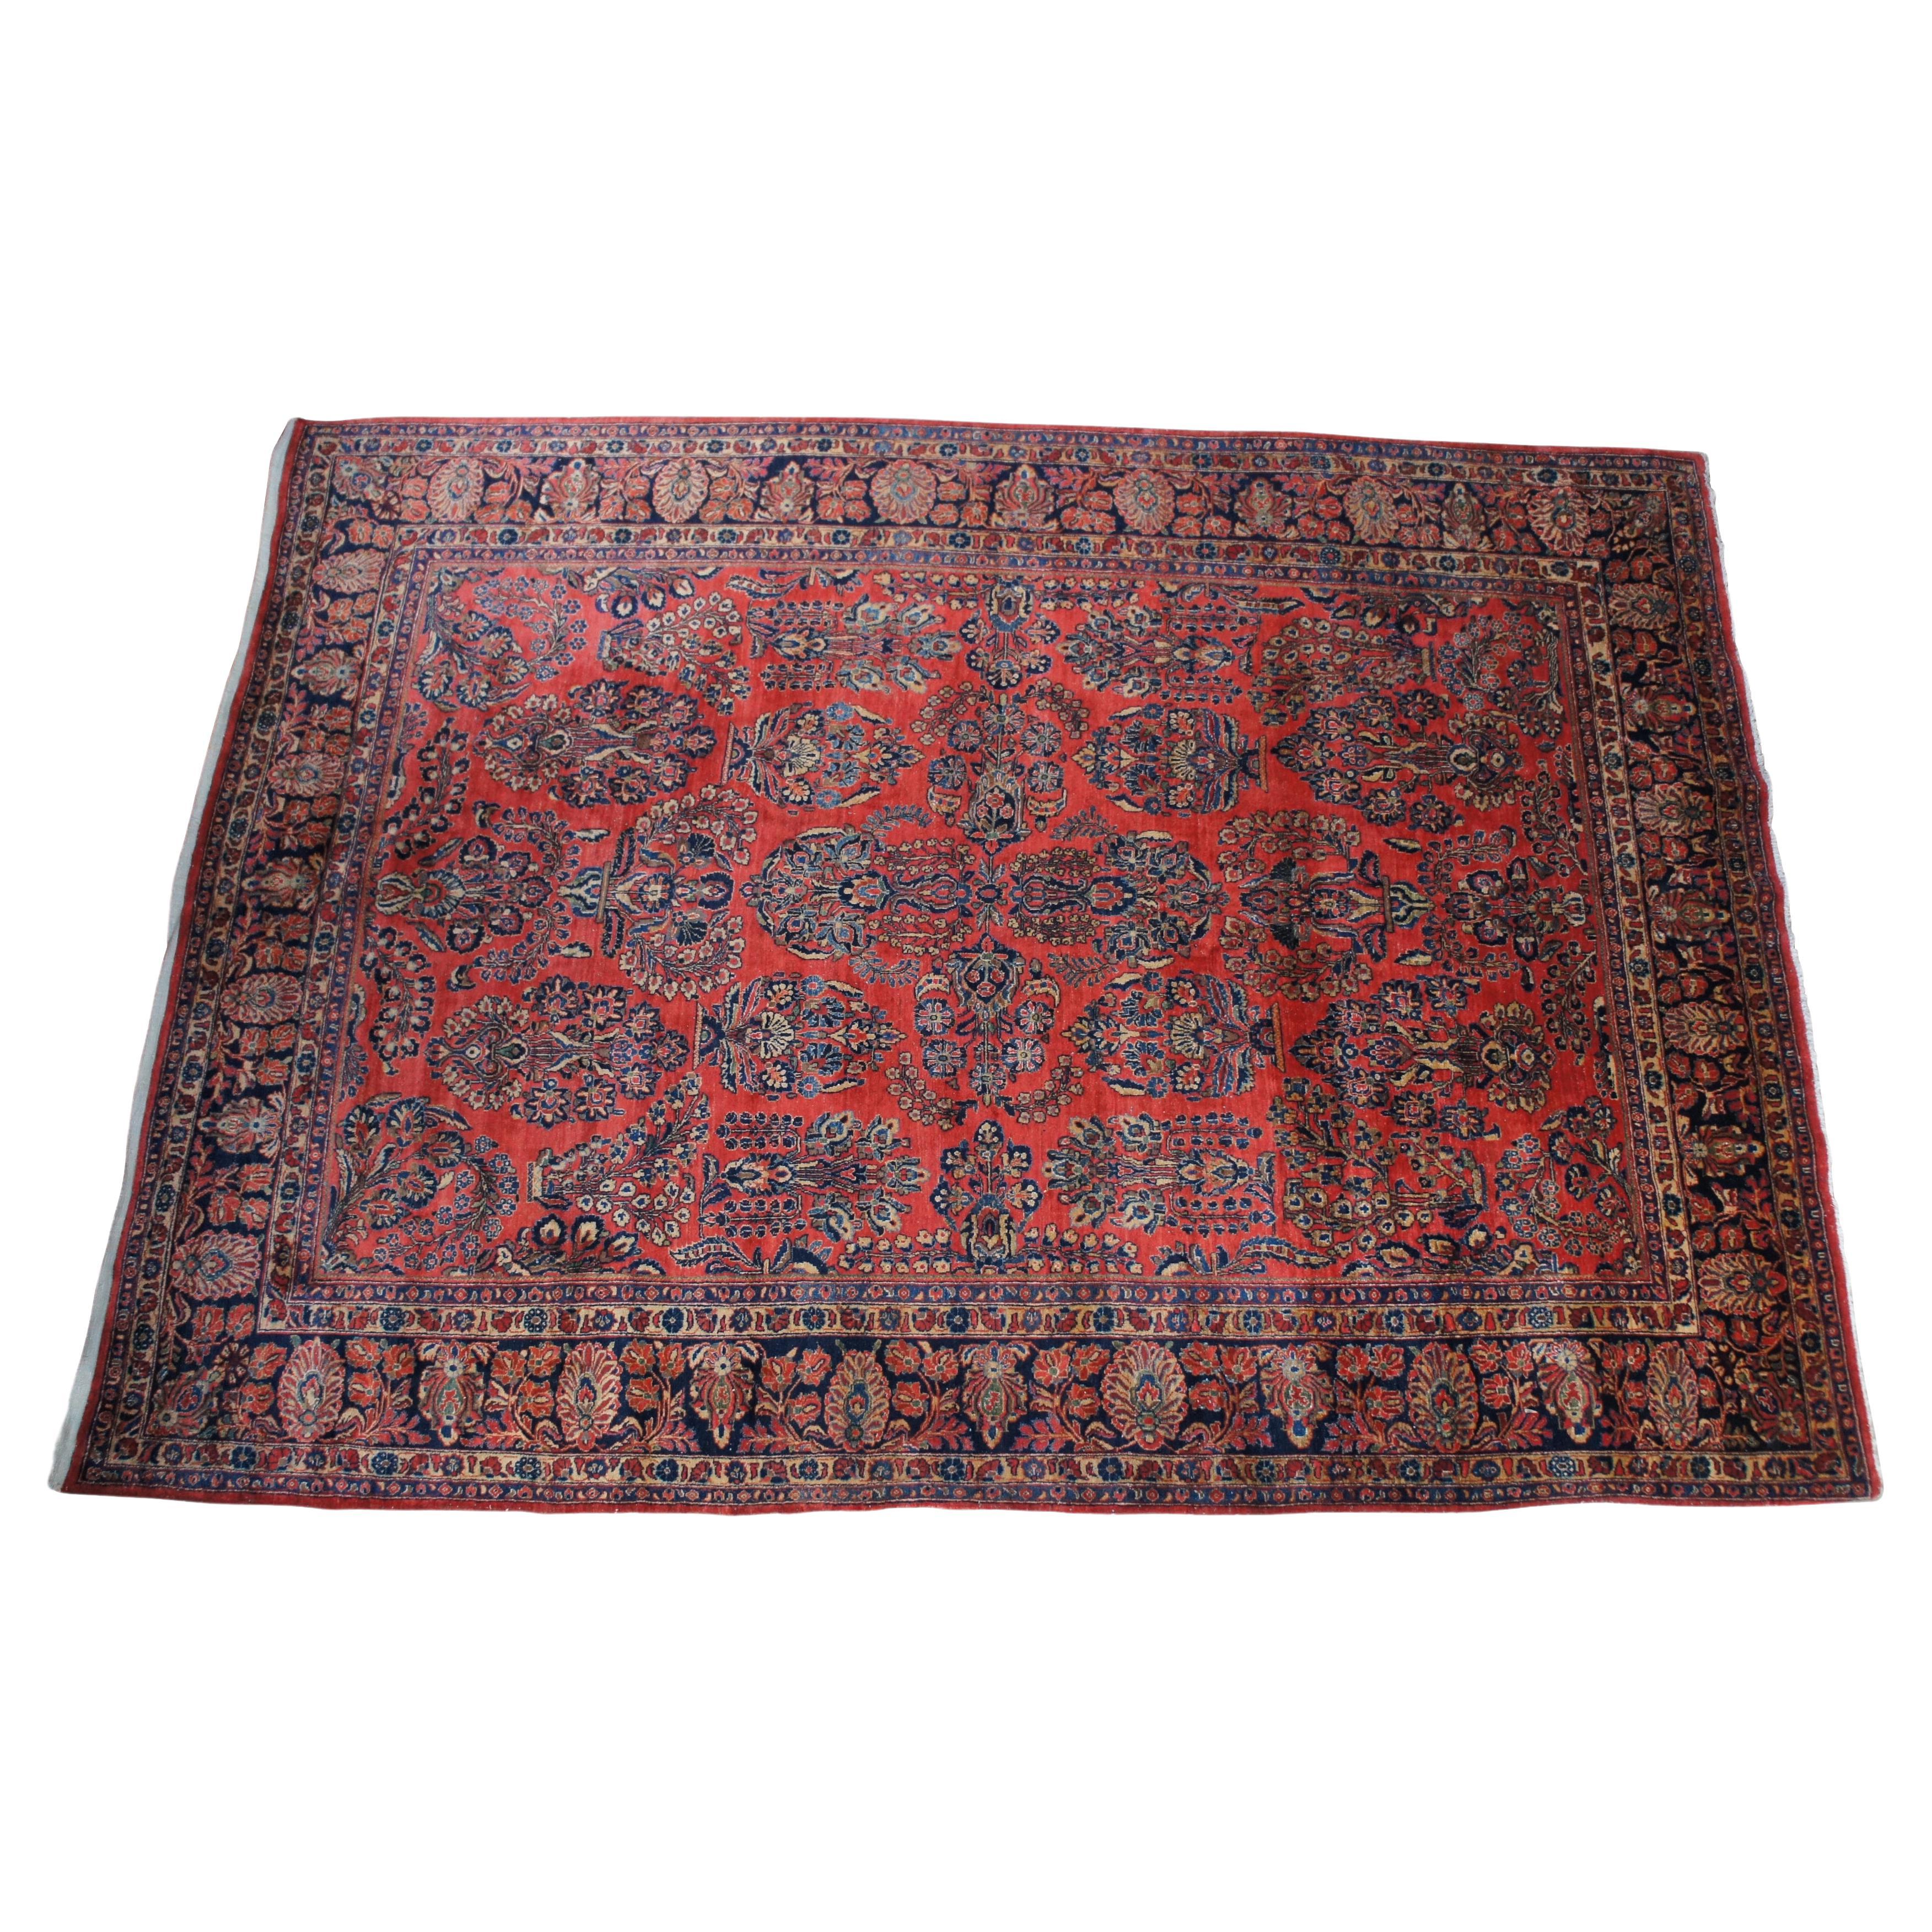 Large vintage Persian Sarouk area rug / carpet featuring a floral motif with red field accented with blues and tans.

The history of Persian Sarouk rugs can be traced back to the late 19th and early 20th centuries. The town of Sarouk, has been a